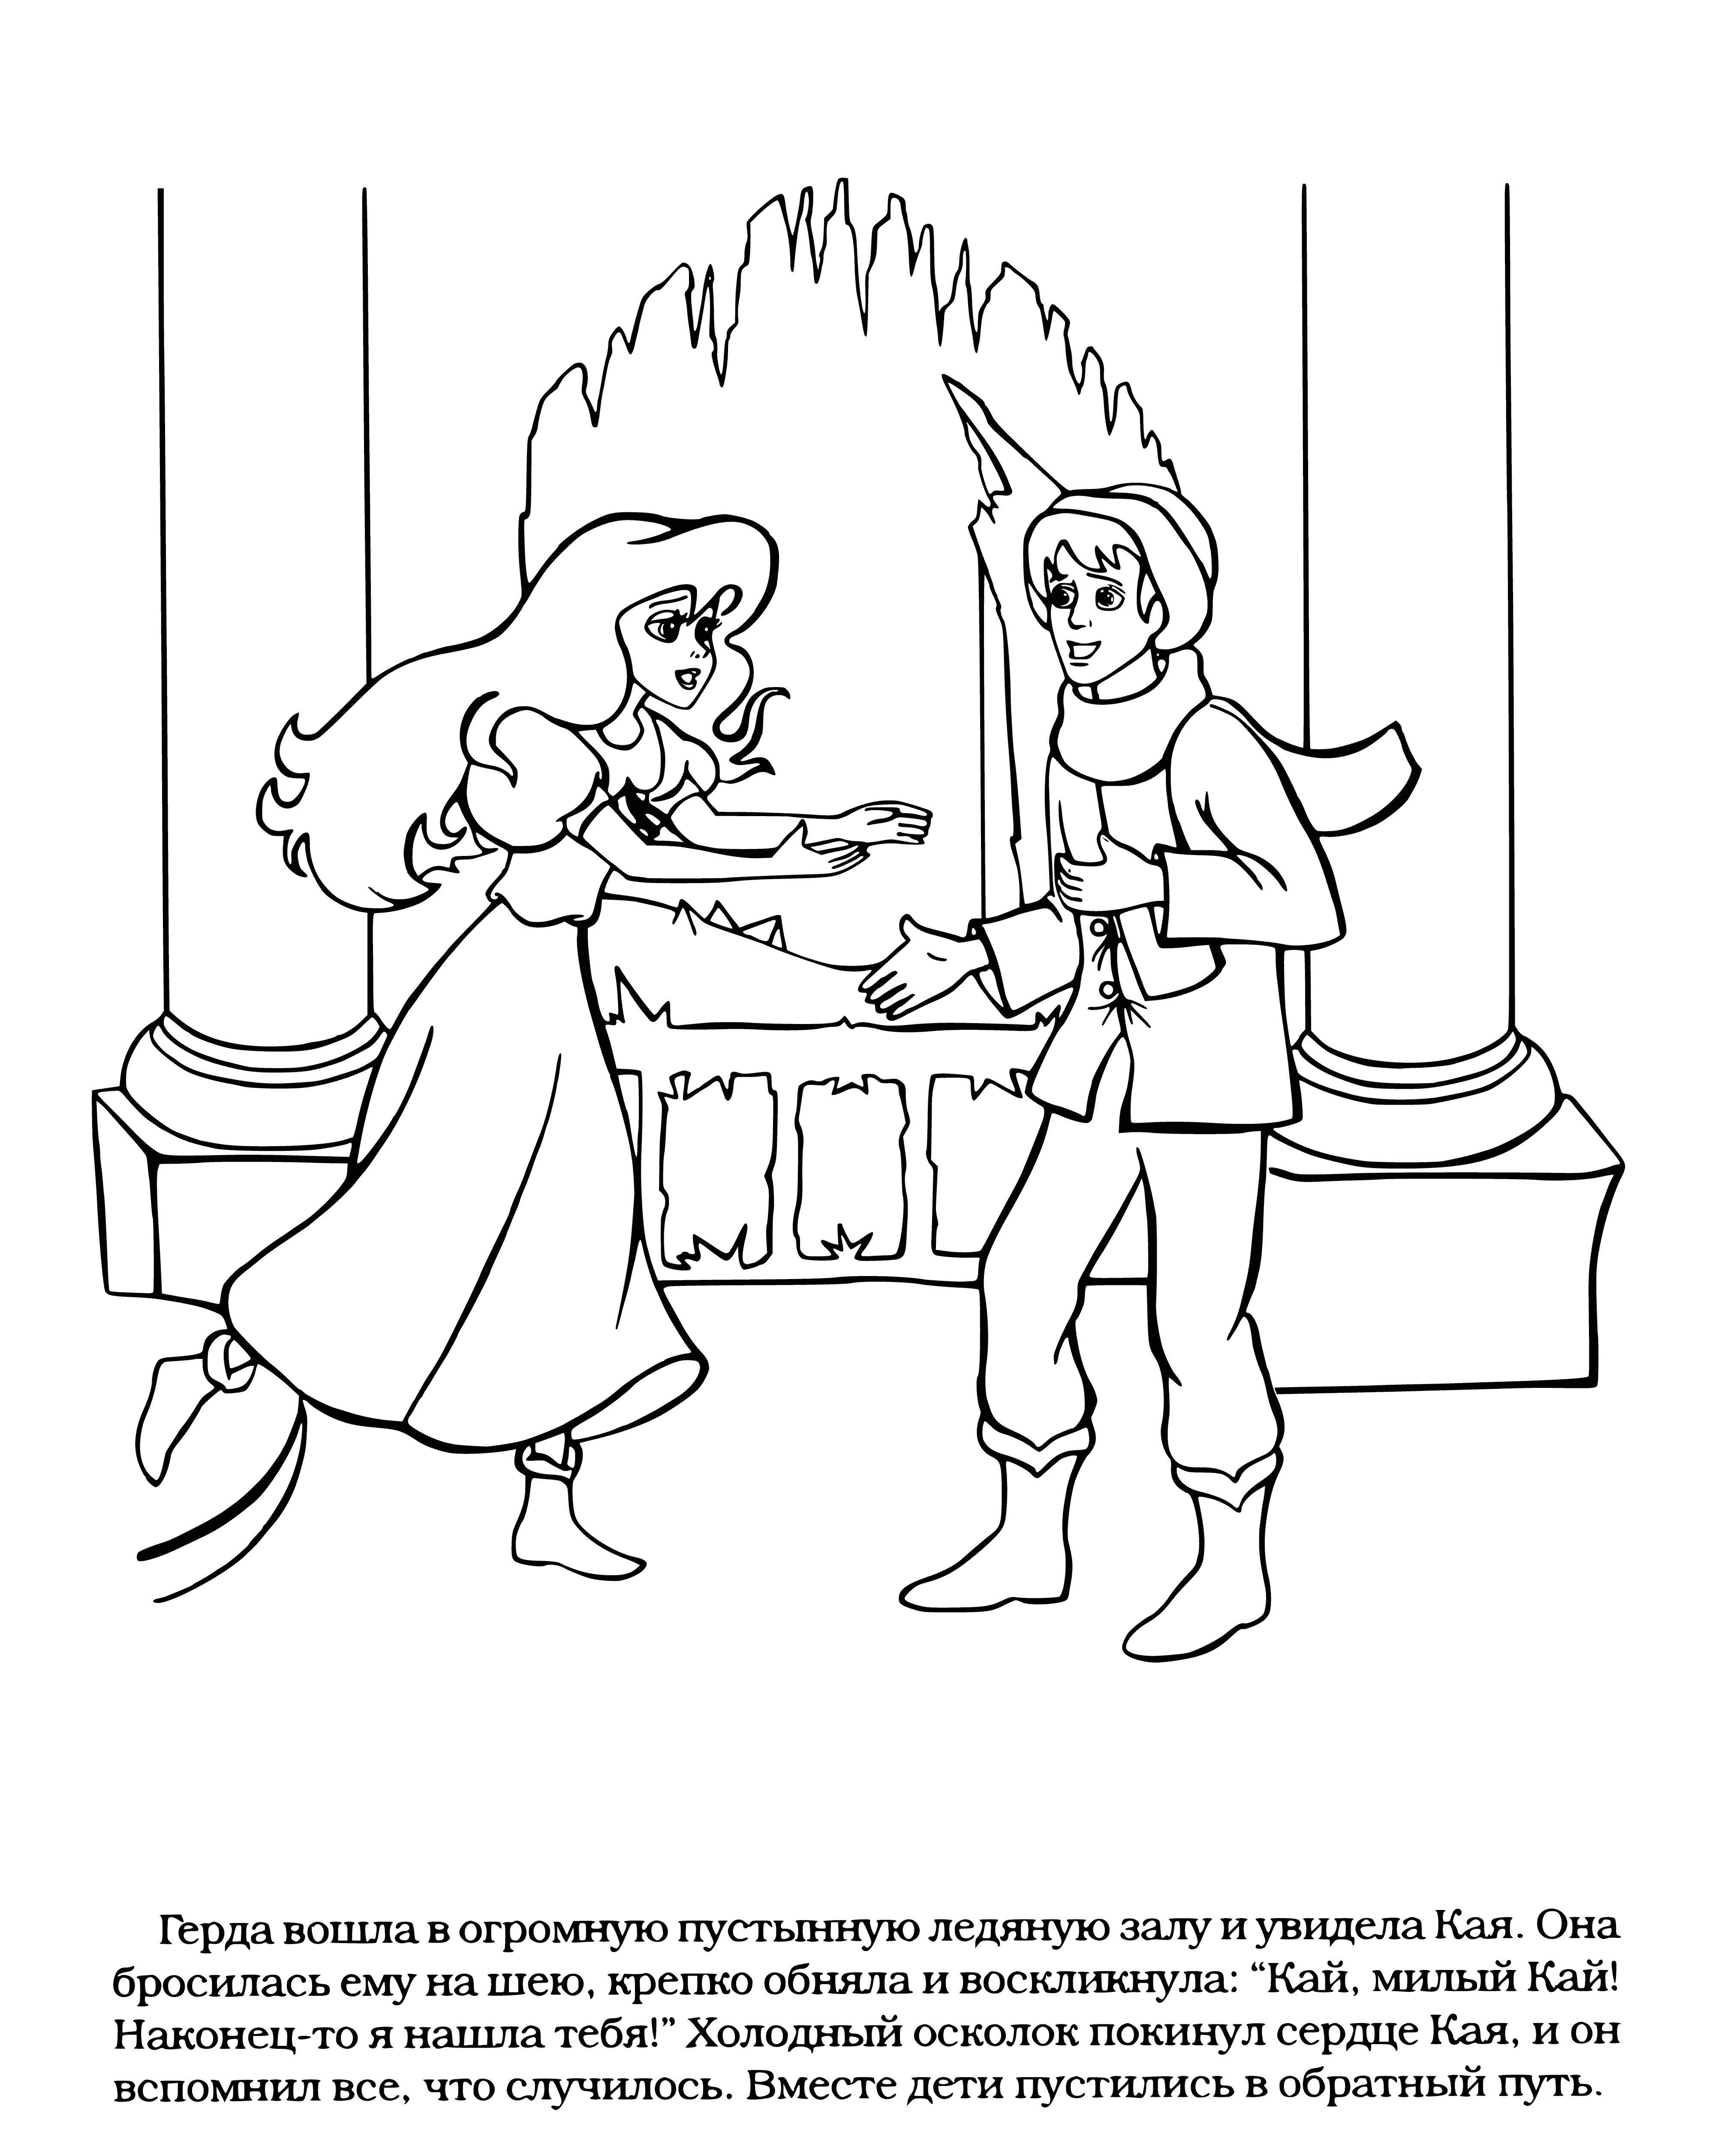 Gerda finds Kai coloring page